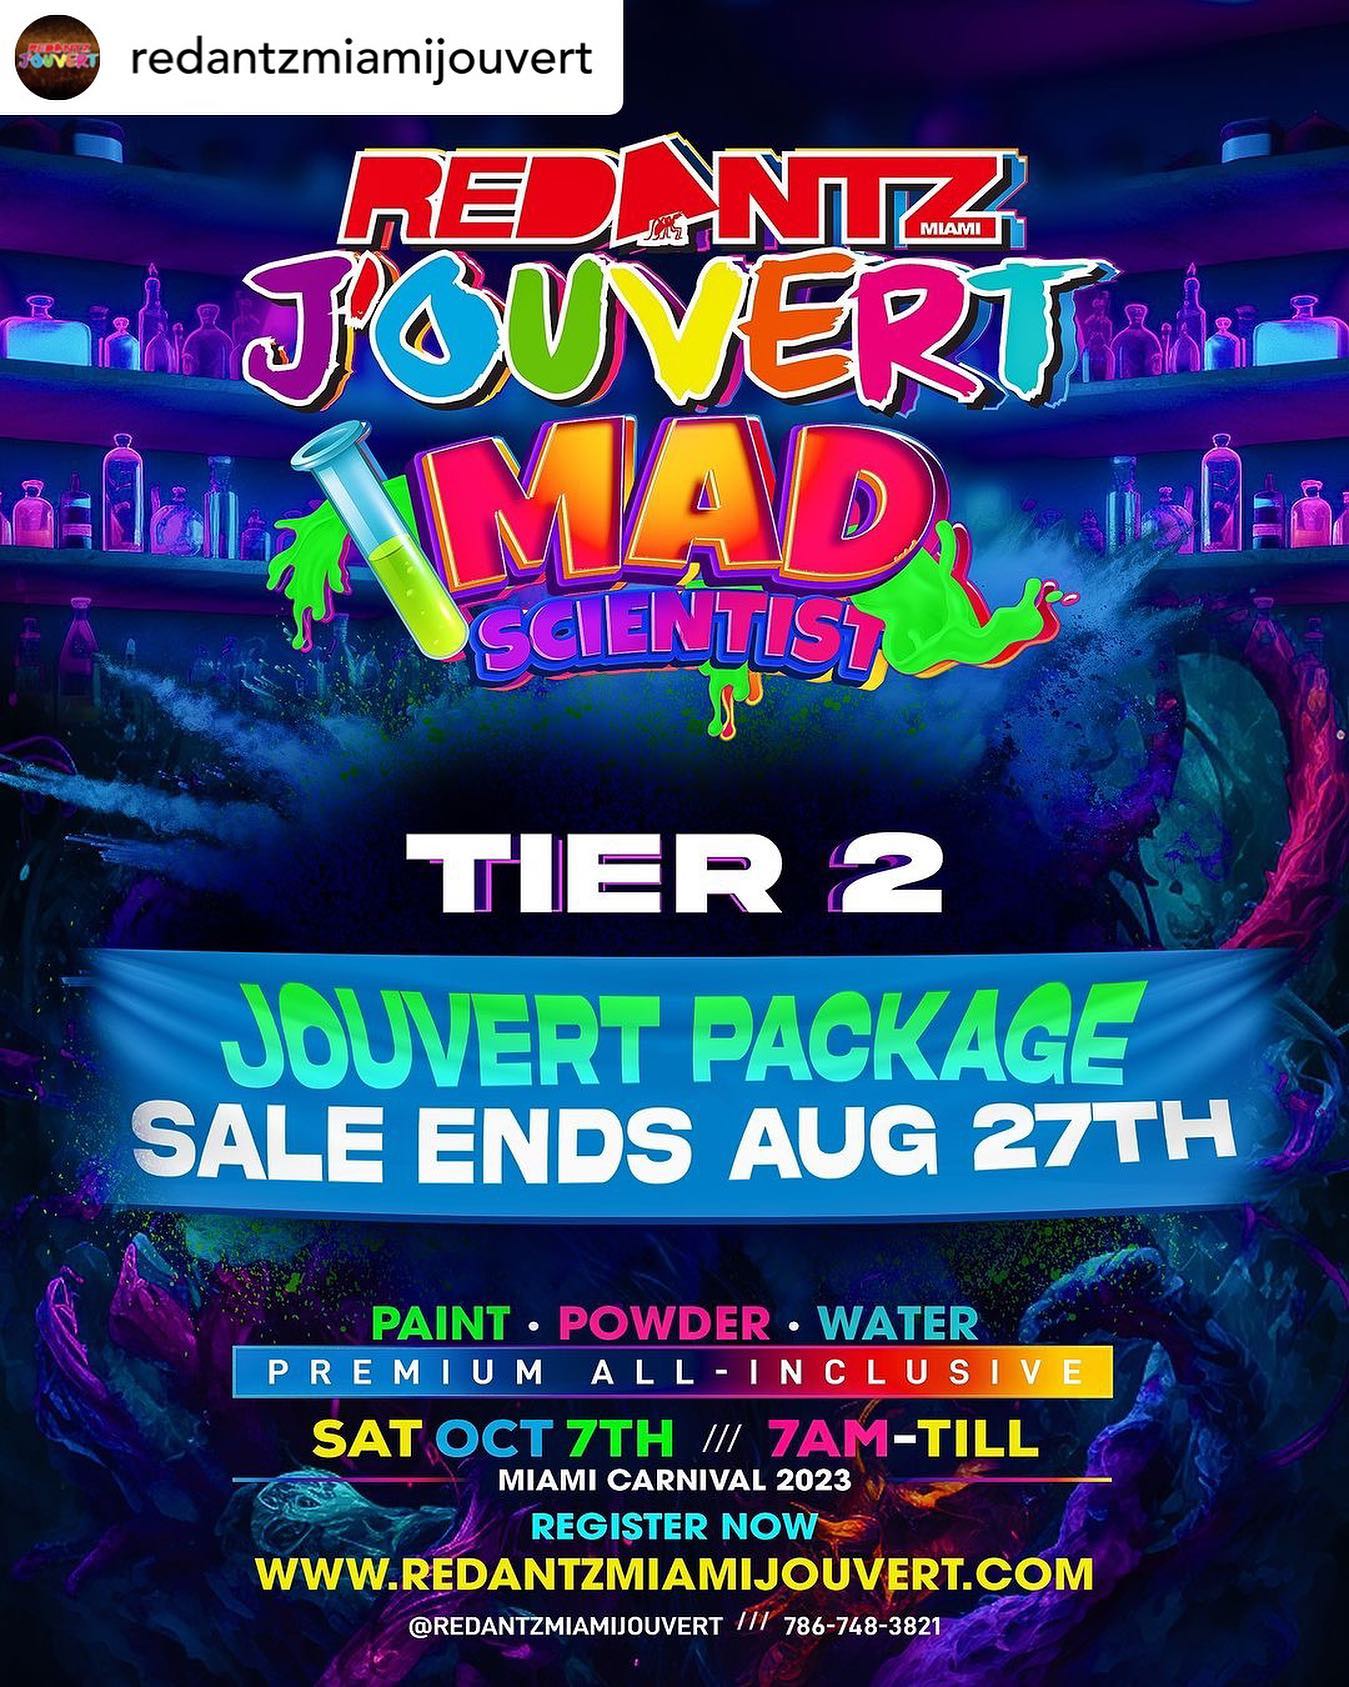 Tier 2 Pricing starts at Only $95 - Sale ends August 27th
Price will increase to Tier 3 on August 28th️.

RED ANTZ MIAMI JOUVERT
Saturday October 7th | 7am - TILL
 PREMIUM ALL INCLUSIVE 🥃

PAINT . POWDER . WATER . ENDLESS VIBES

GET YOUR JOUVERT PACKAGE NOW
www.redantzmiamijouvert.com
(Link in Bio)

 Apparel Options:
Male: T-shirt or Tank
Female: V-Neck Tee, Tank, Bodysuit or Body Armor

Jouvert Package Includes:
- Antz Apparel
- Branded Mug
- Backpack
- Rag
- Whistle
- Phone Protector Pouch
- Unlimited Premium Drinks
- Breakfast
- Park Entrance Ticket
- Paint & Powder
- Water Truck
& much more

Don't Forget! We offer a Group Special Rate to 15 or more revelers.
(must text or call for more information)

LOOKOUT FOR OUR
RK MERCHANDISE STORE
coming soon with Jouvert Hott Shorts, Visors, Fanny Packs & more

@redantzmiamijouvert 
@weareteamrk
786-748-3821 | 954-638-5978